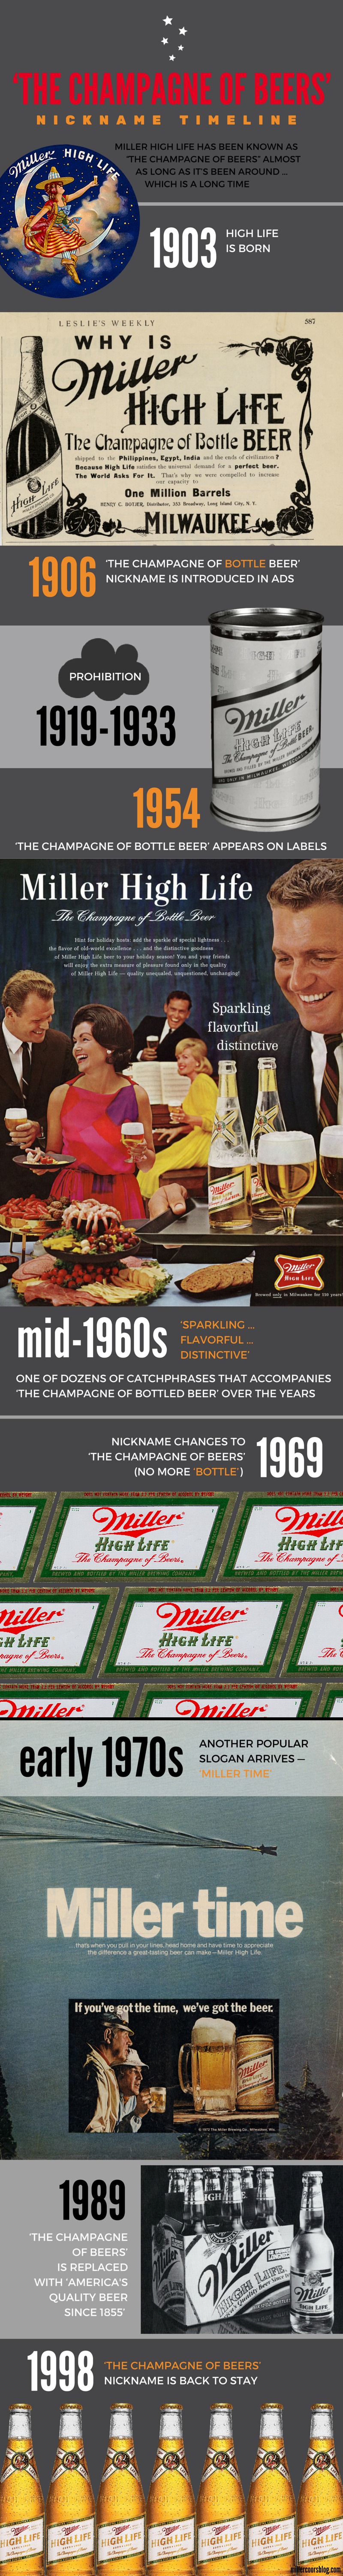 Miller High Life "Champagne of Beers" timeline